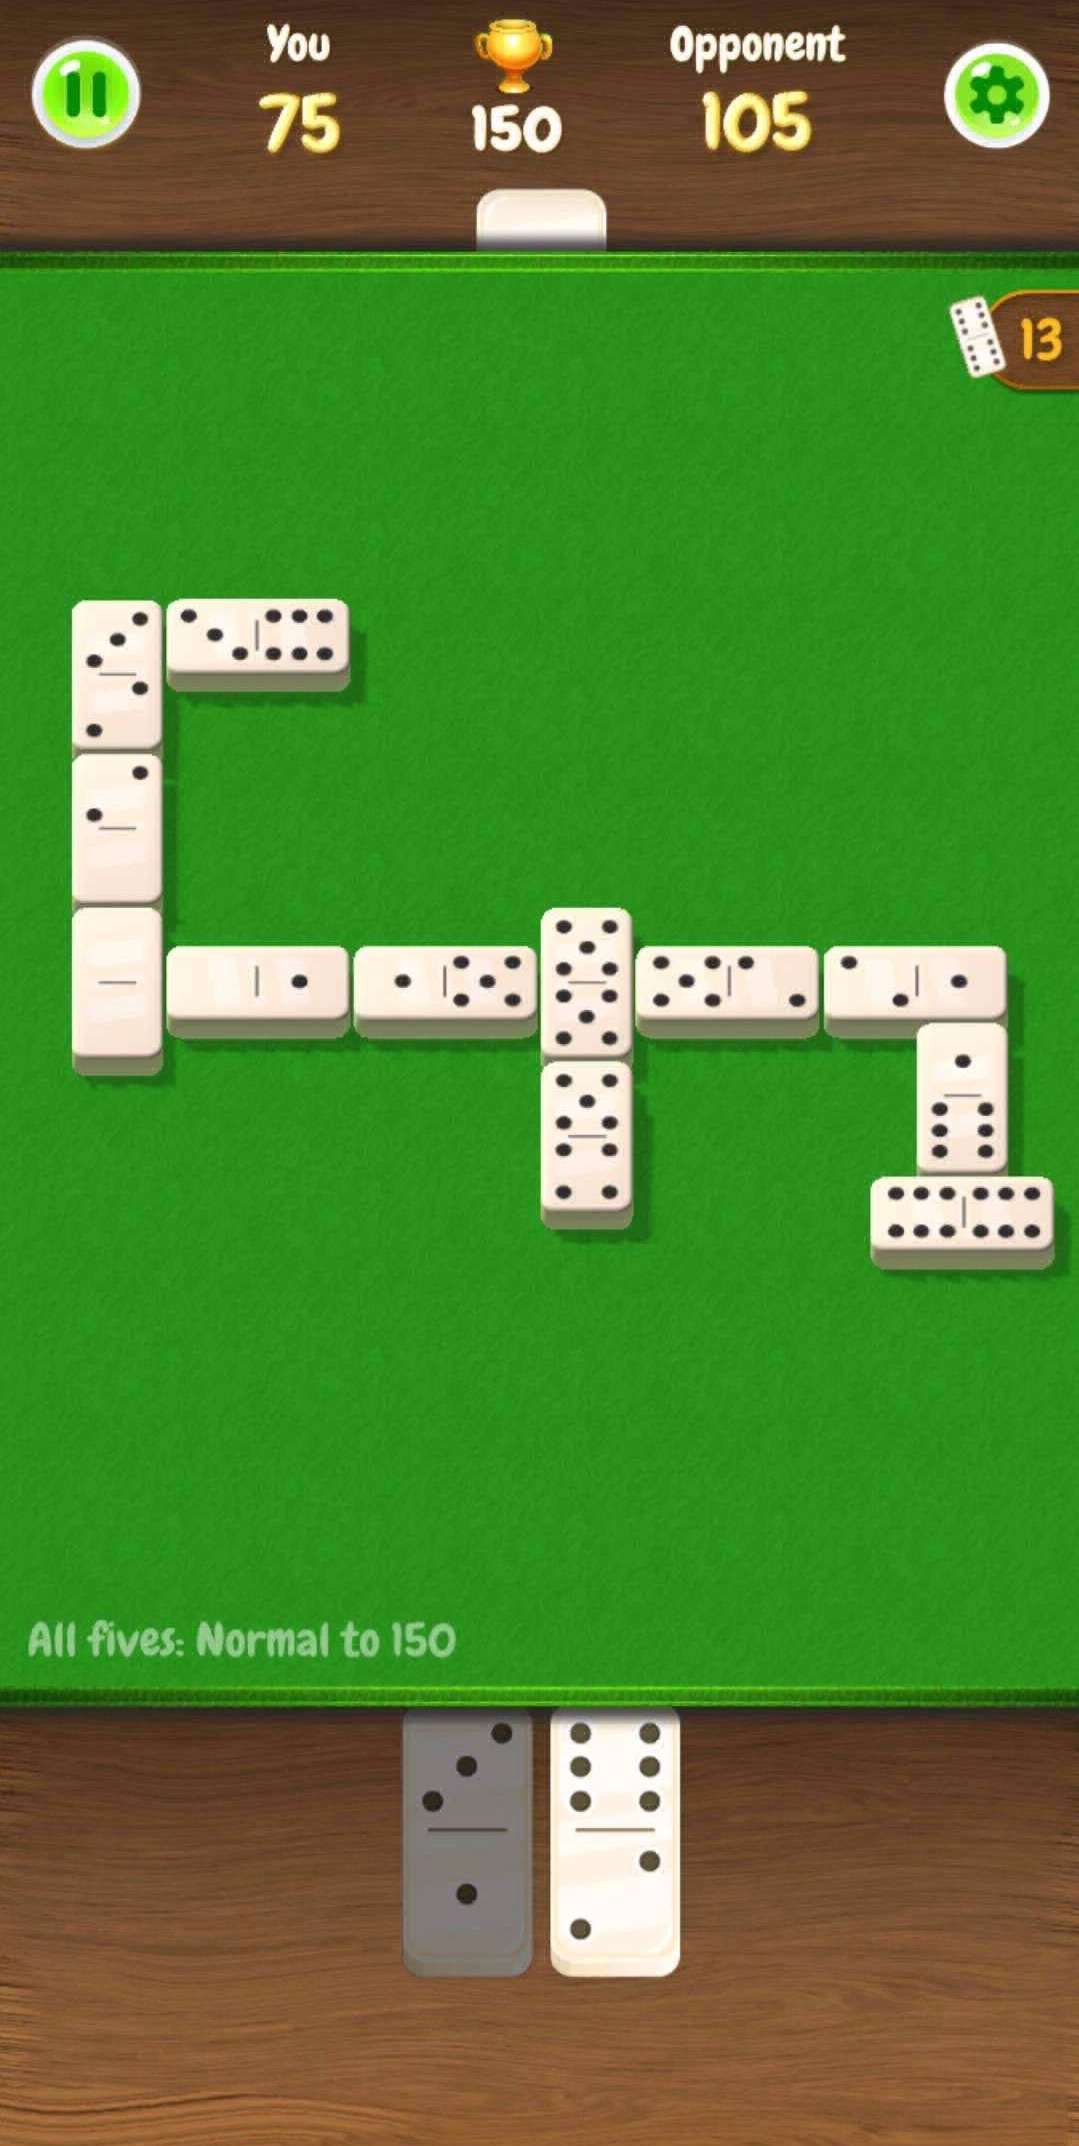 You can play mobile multiplayer Domino games online for free